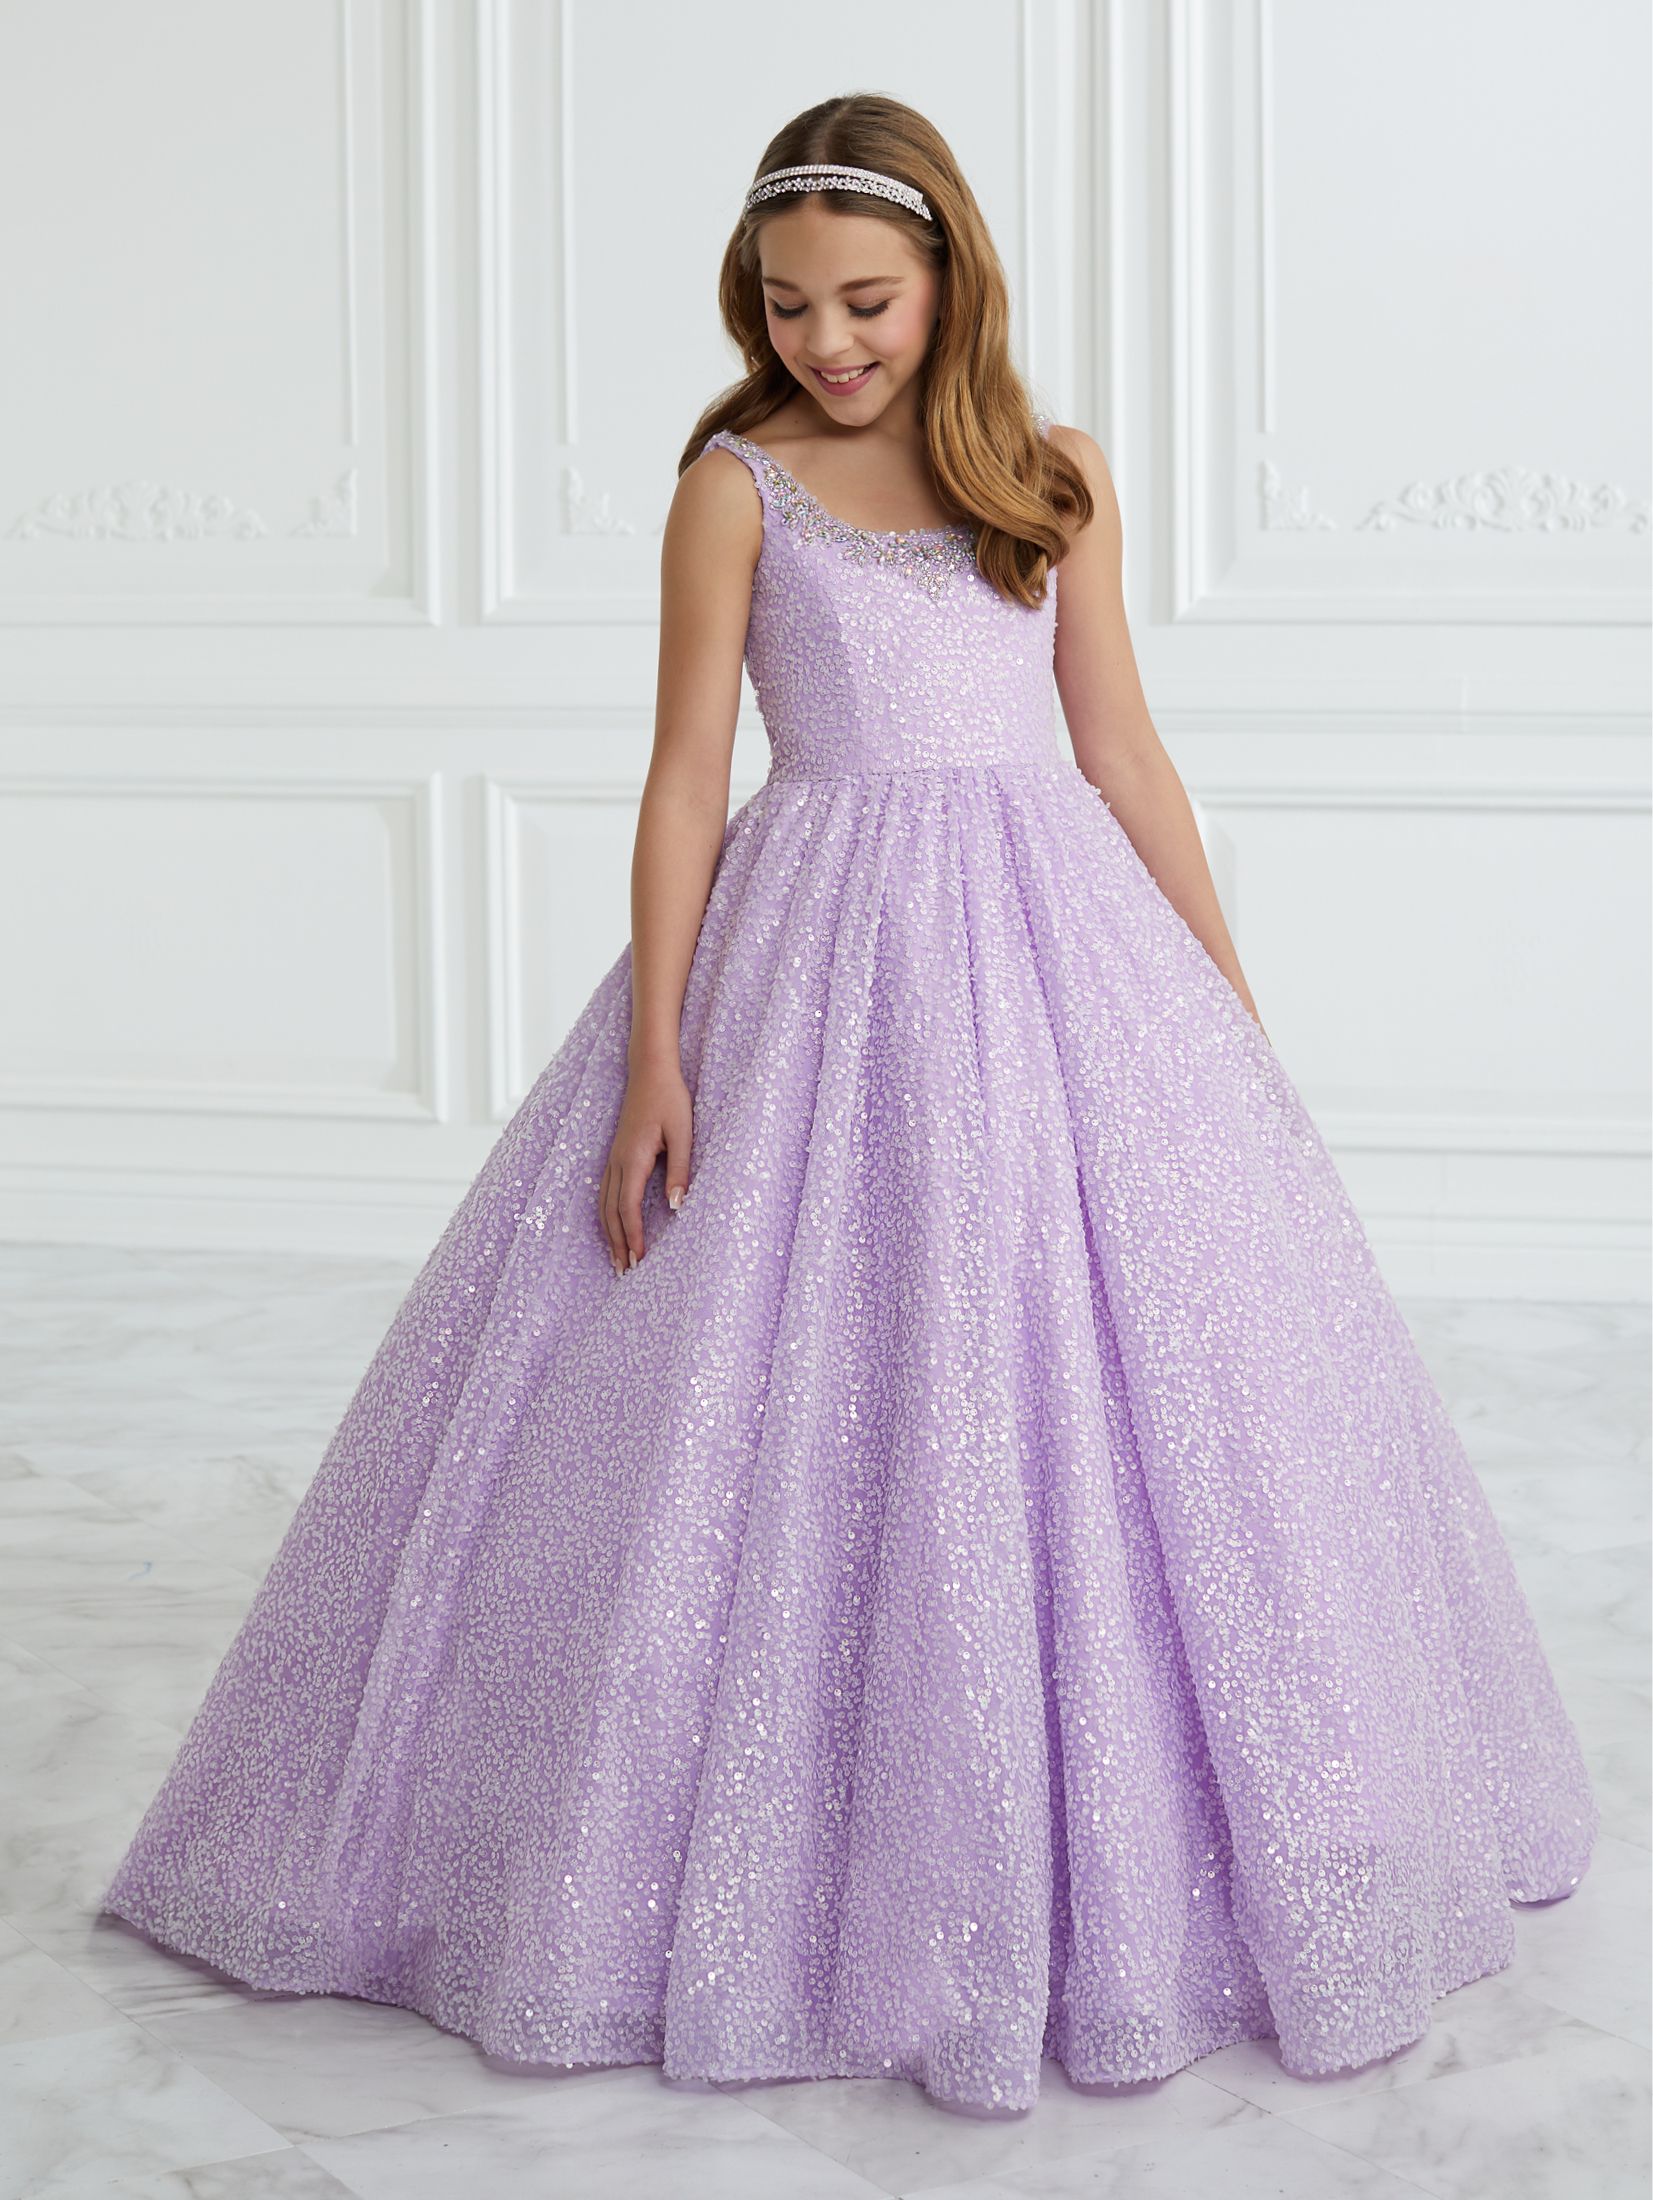 NNJXD Girl Princess Pageant Dress Kids Prom Ball Gowns India | Ubuy